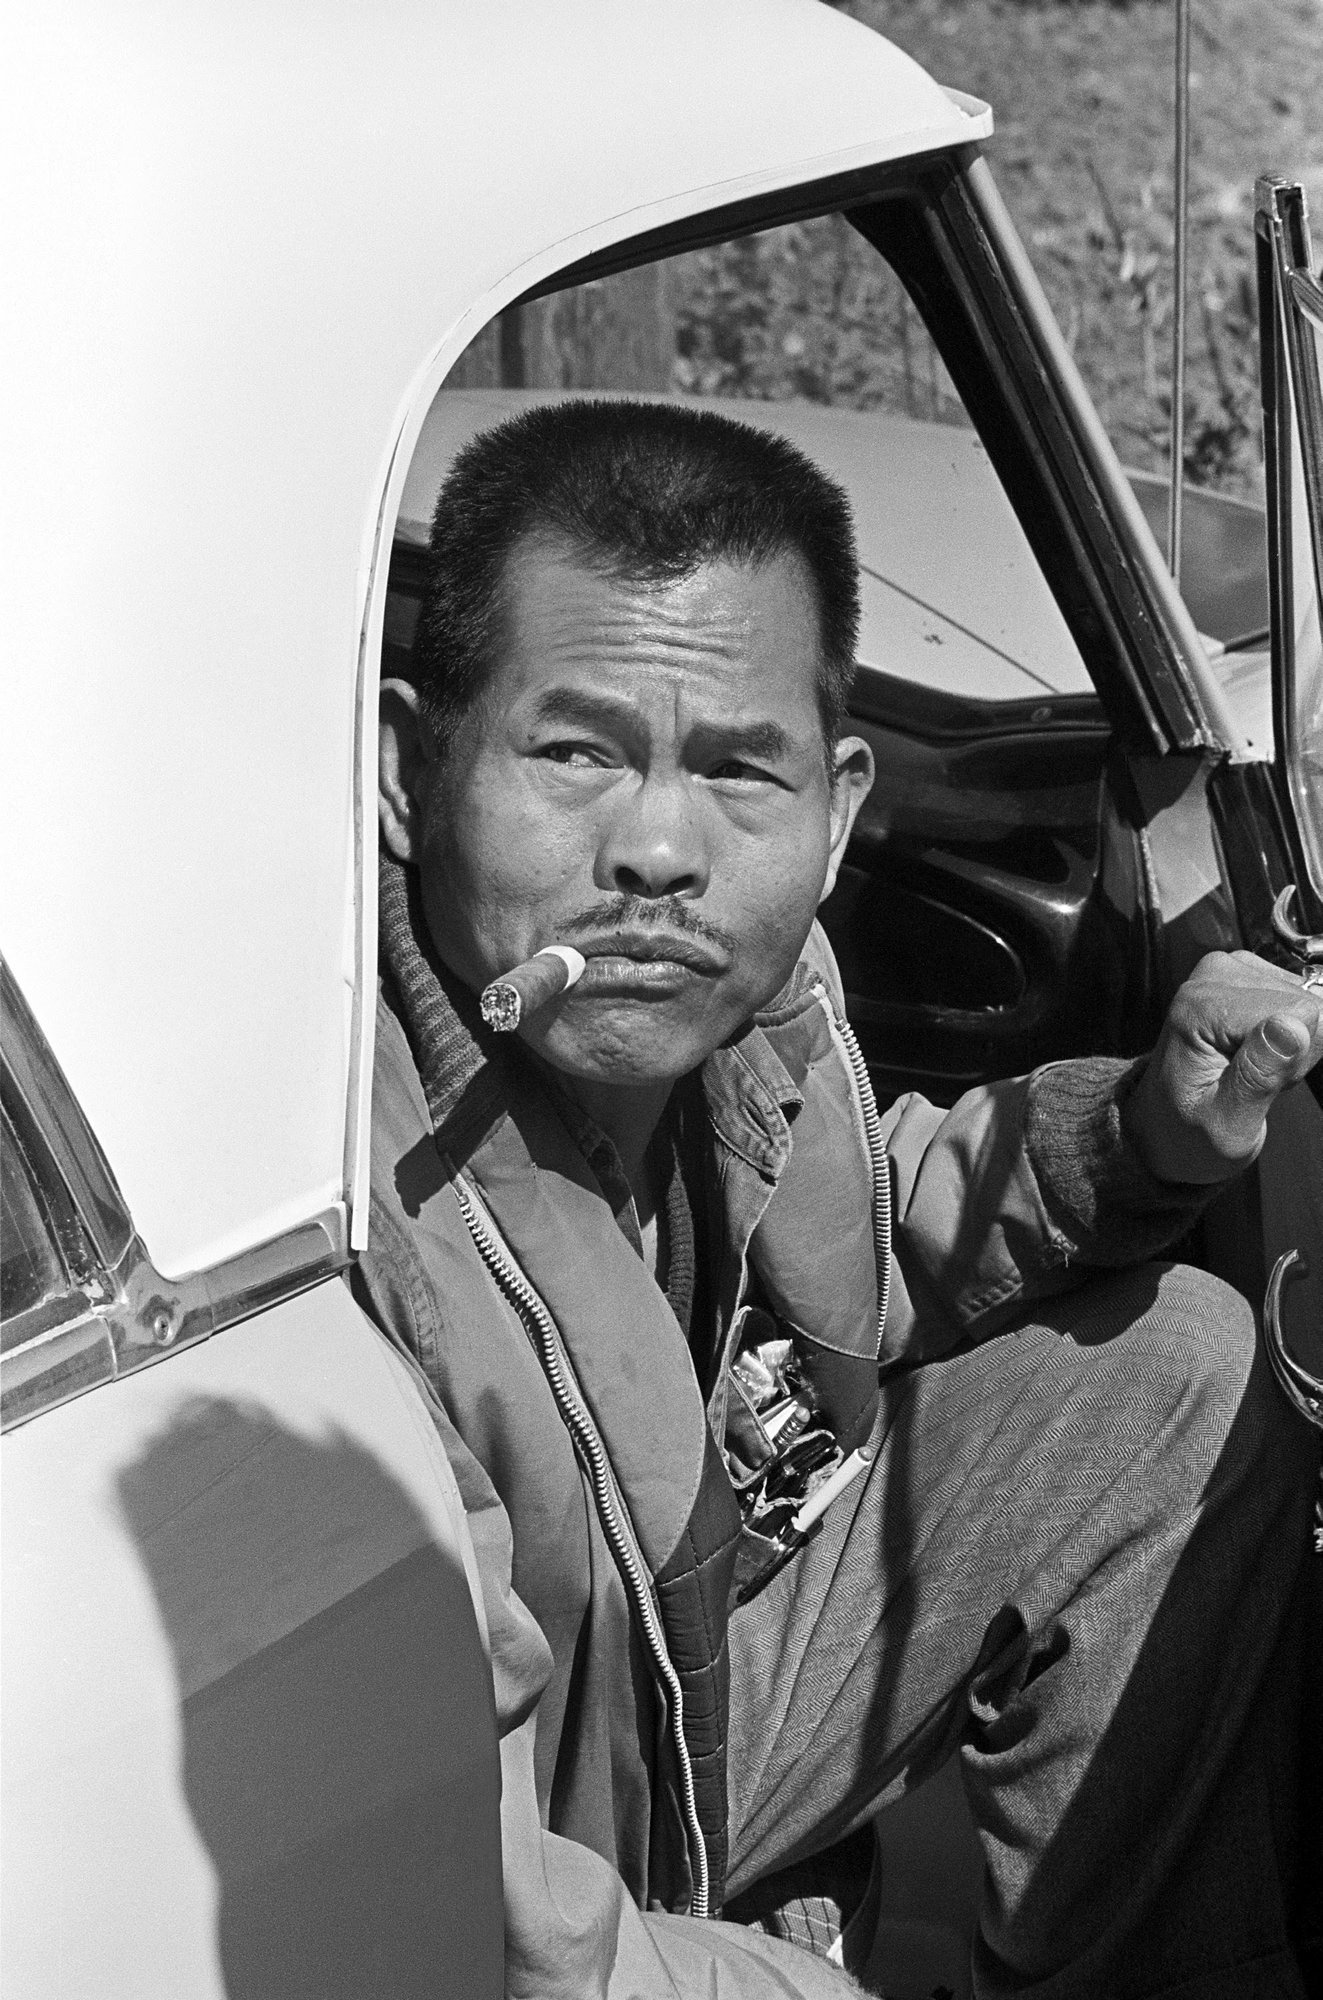 A black-and-white photograph of a man sitting in the passenger seat of a car. The car door is open; he looks back with his left hand on the car door and a cigar in his mouth. In the foreground, a shadow is visible on the car.